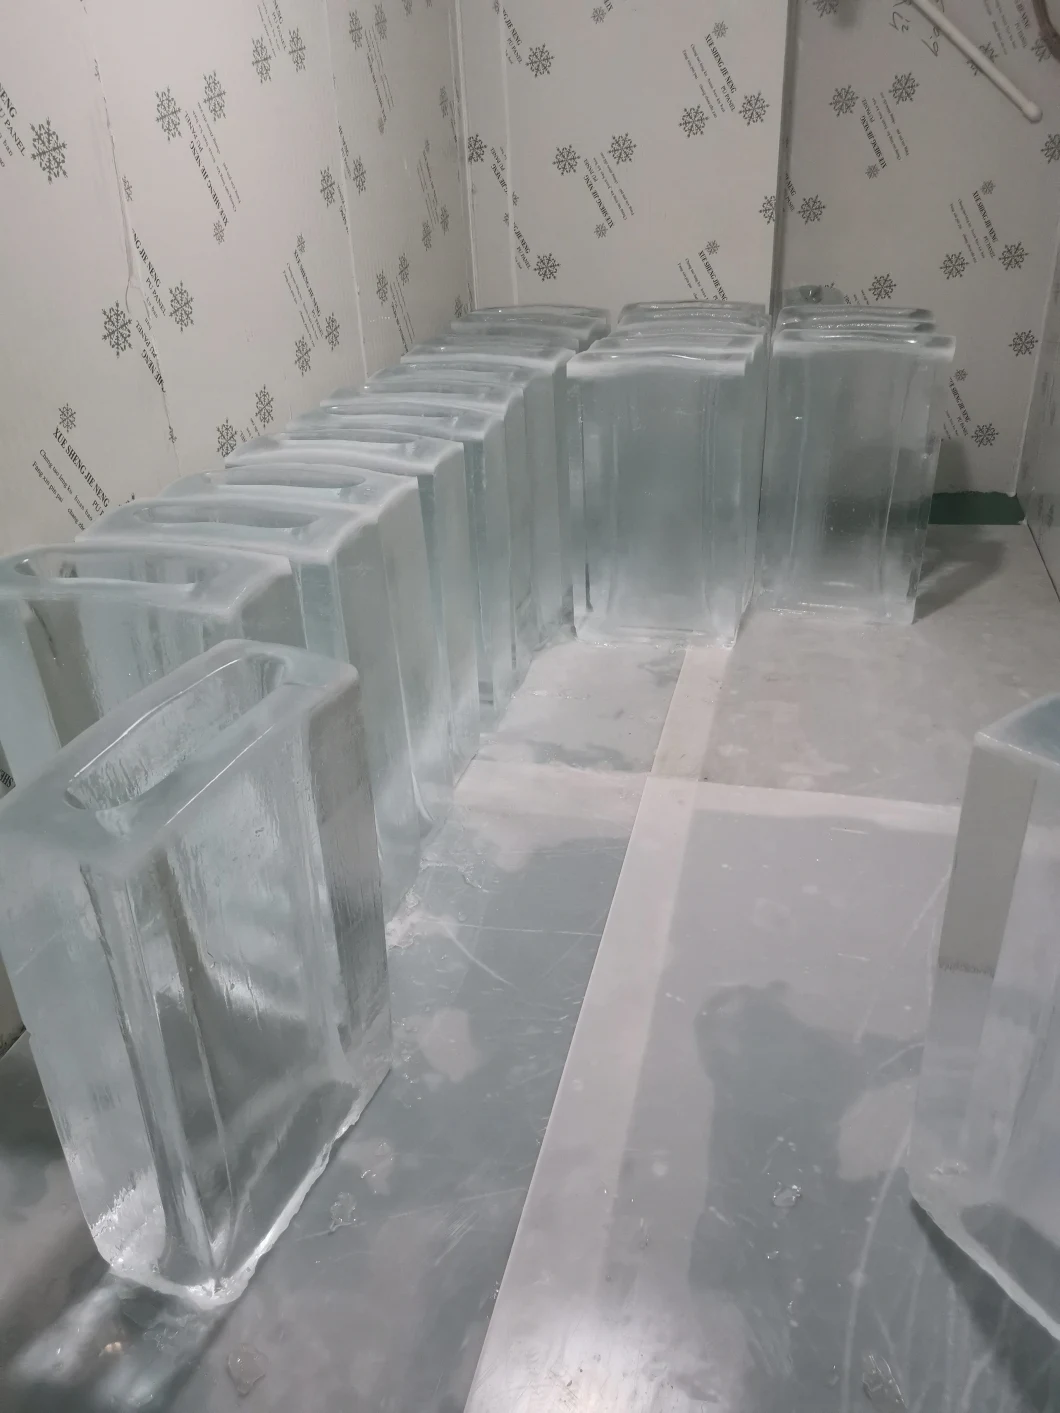 Clear Transparent Block Ice Making Machine Use for Food